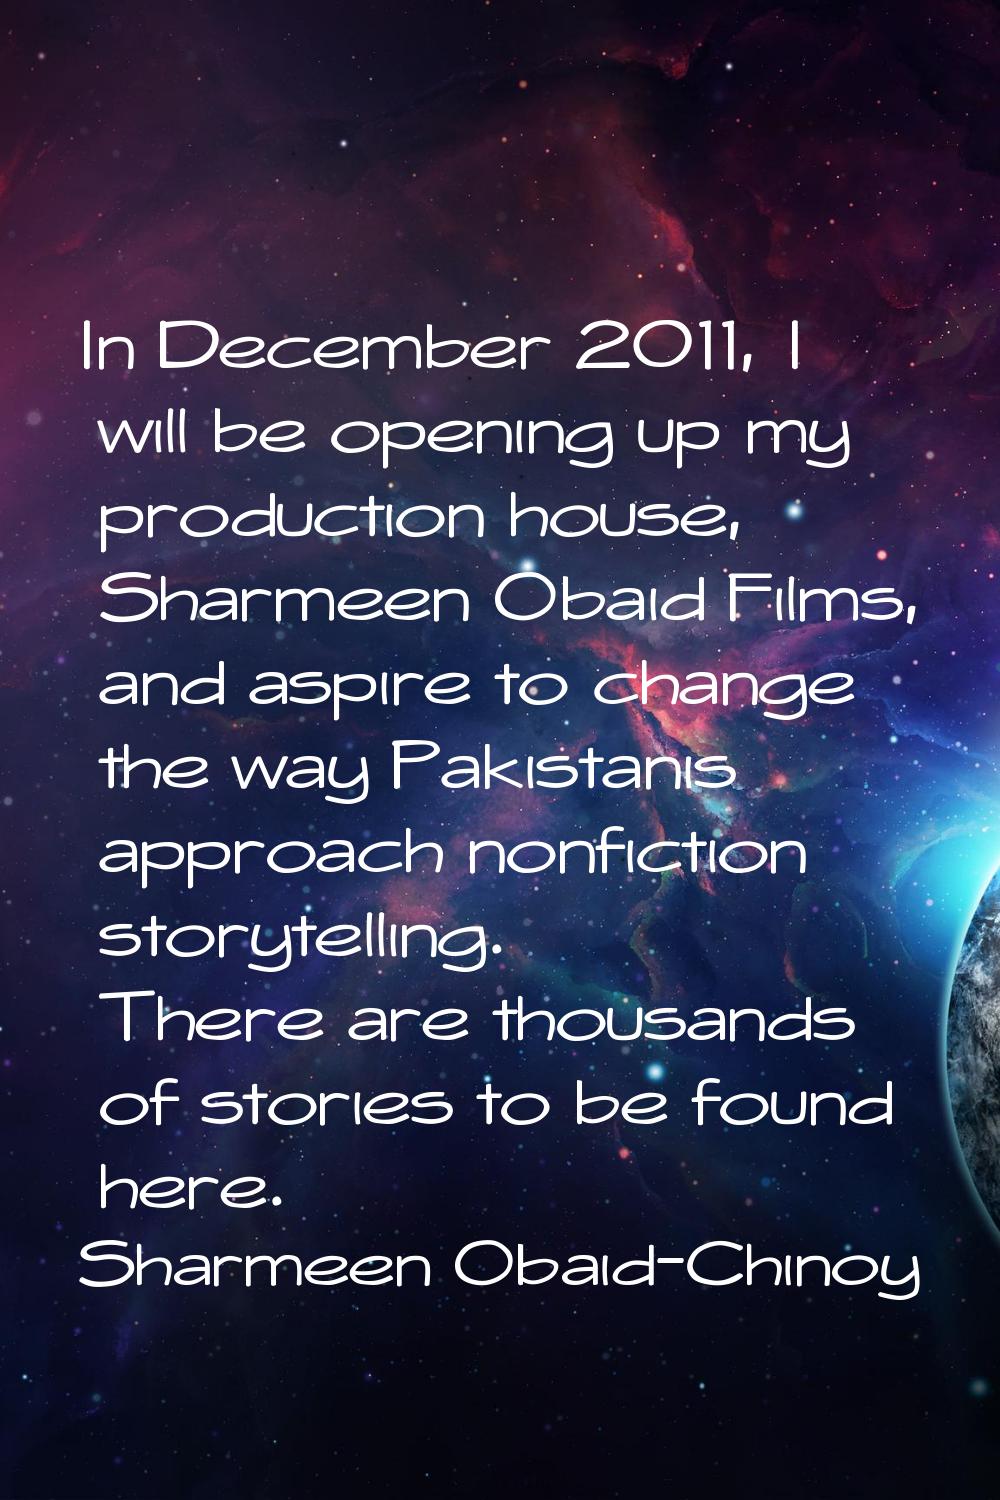 In December 2011, I will be opening up my production house, Sharmeen Obaid Films, and aspire to cha